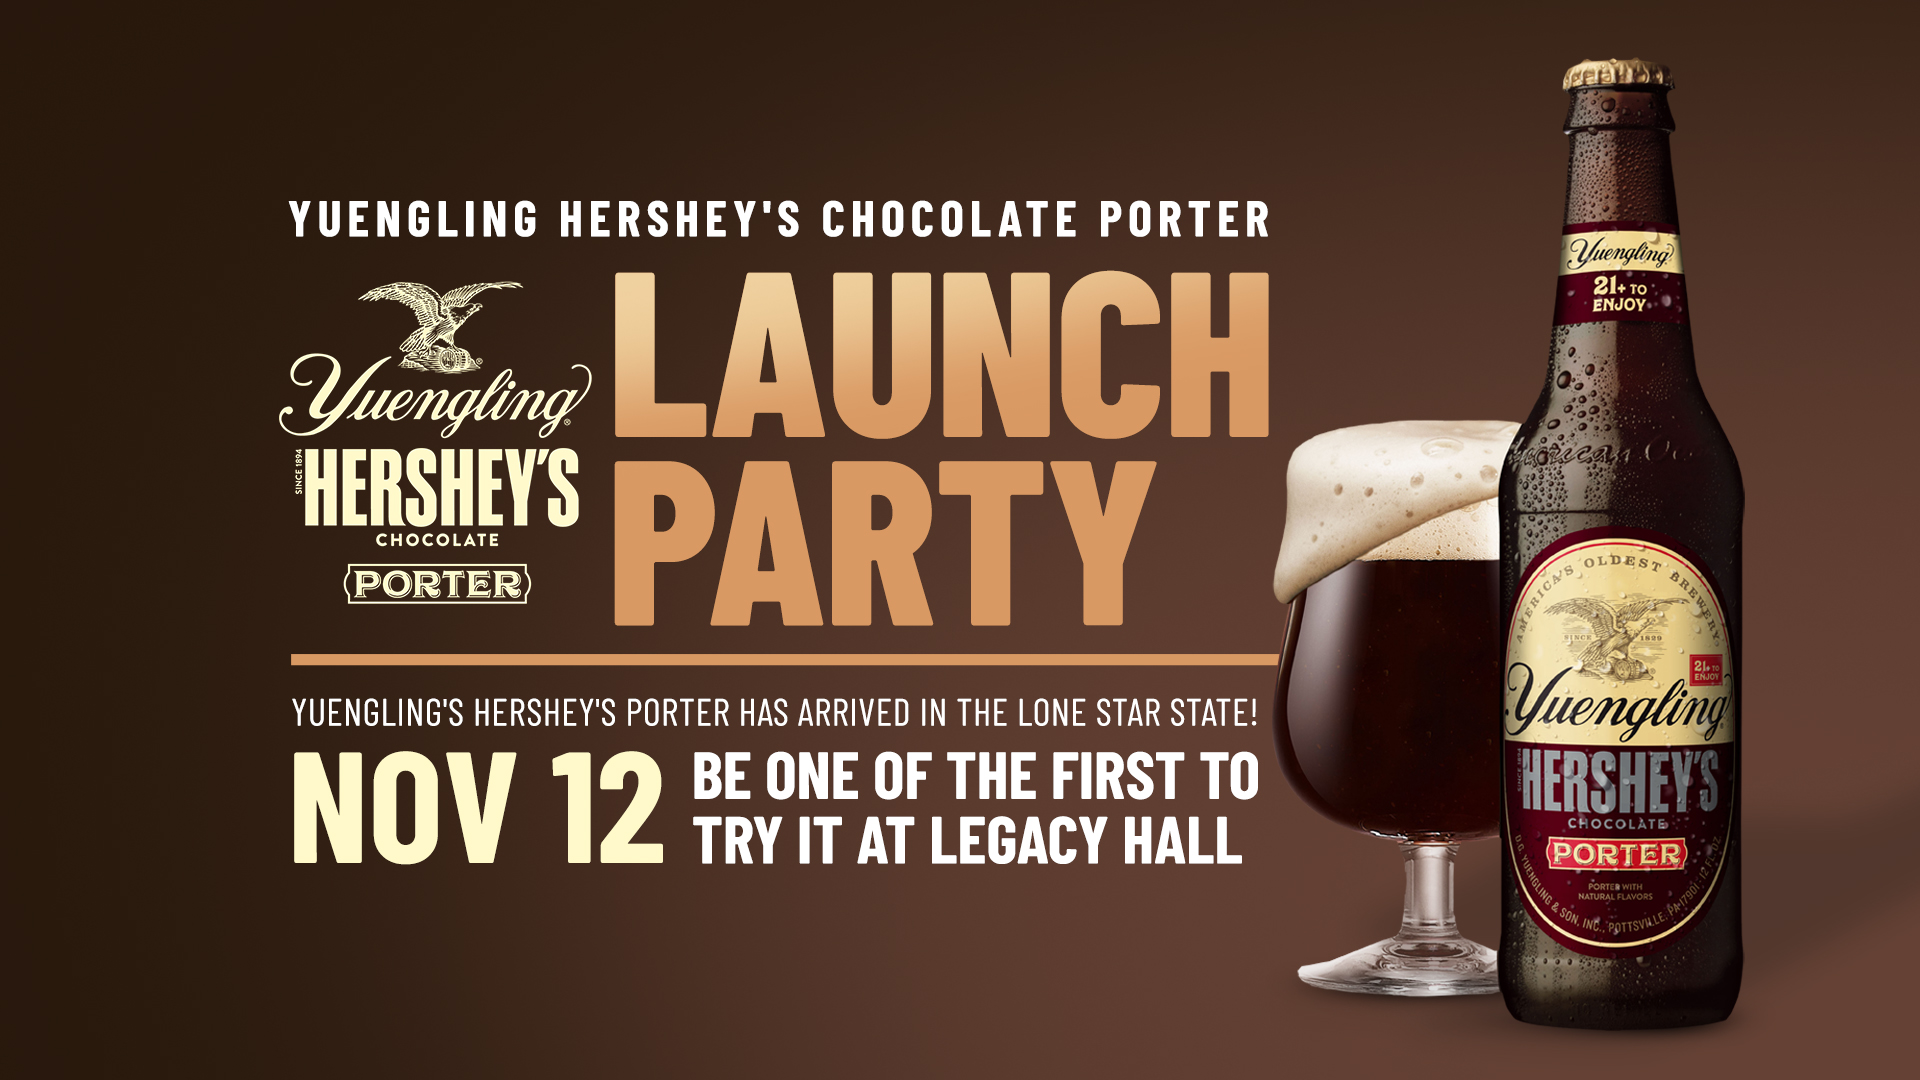 Yuengling's Hershey's Chocolate Porter Launch Party Legacy Hall